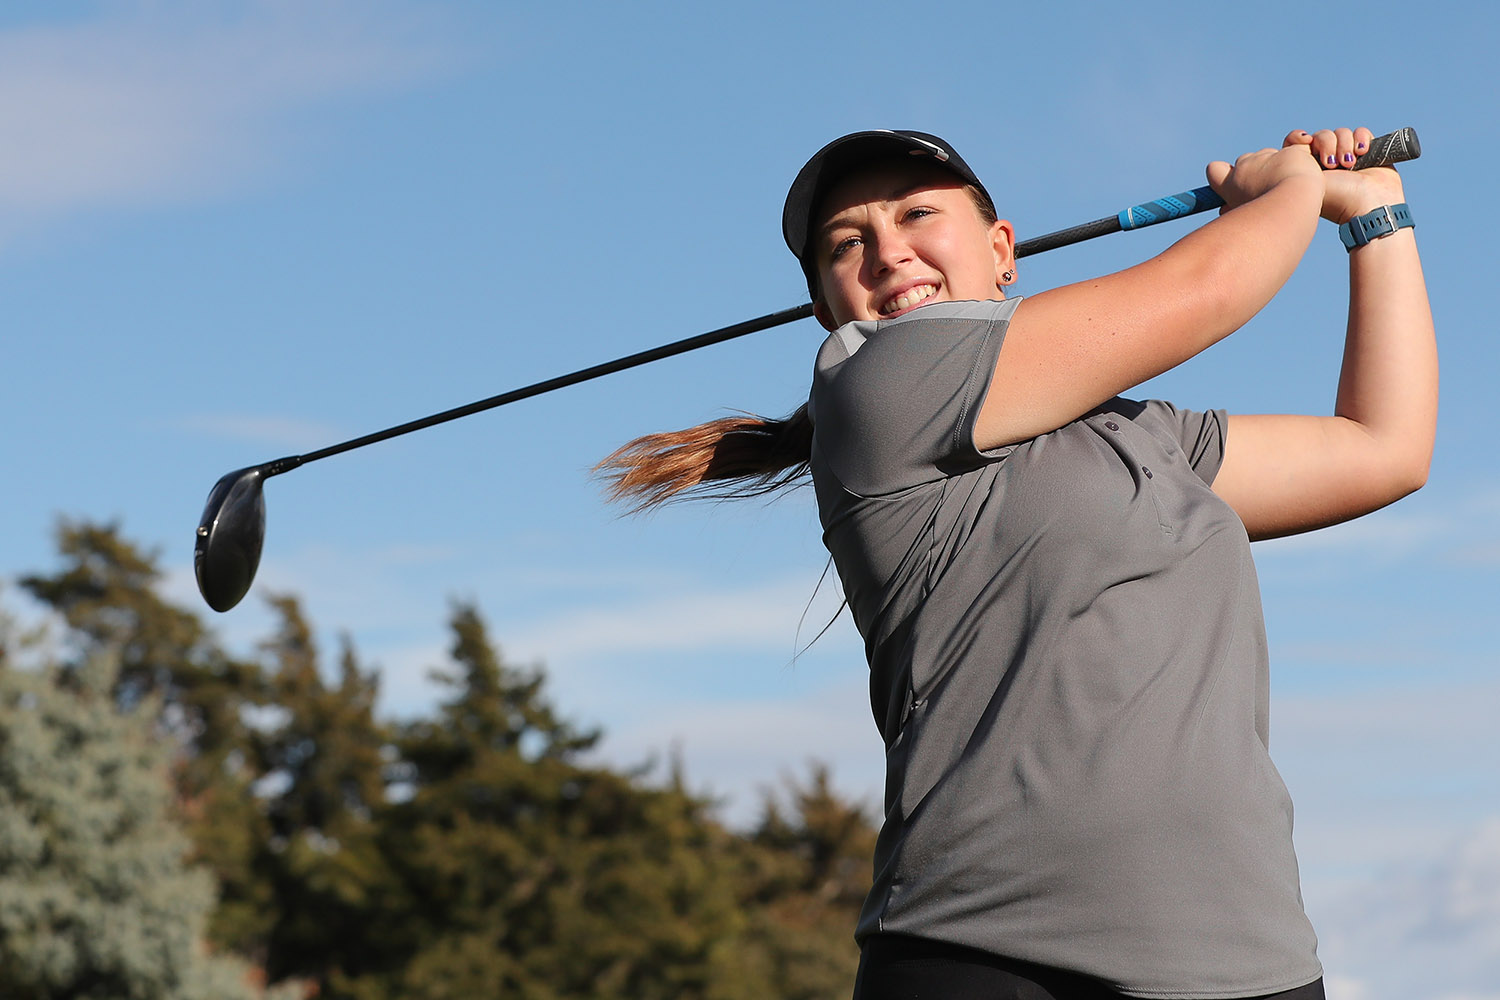 UNK senior golfer Mikayla Frei will graduate in May with degrees in athletic training and psychology. “Golf brought me out here to UNK for me to get my education, and I don’t know that I would have gotten a better education anywhere else,” she said. (Photos by Corbey R. Dorsey, UNK Communications)